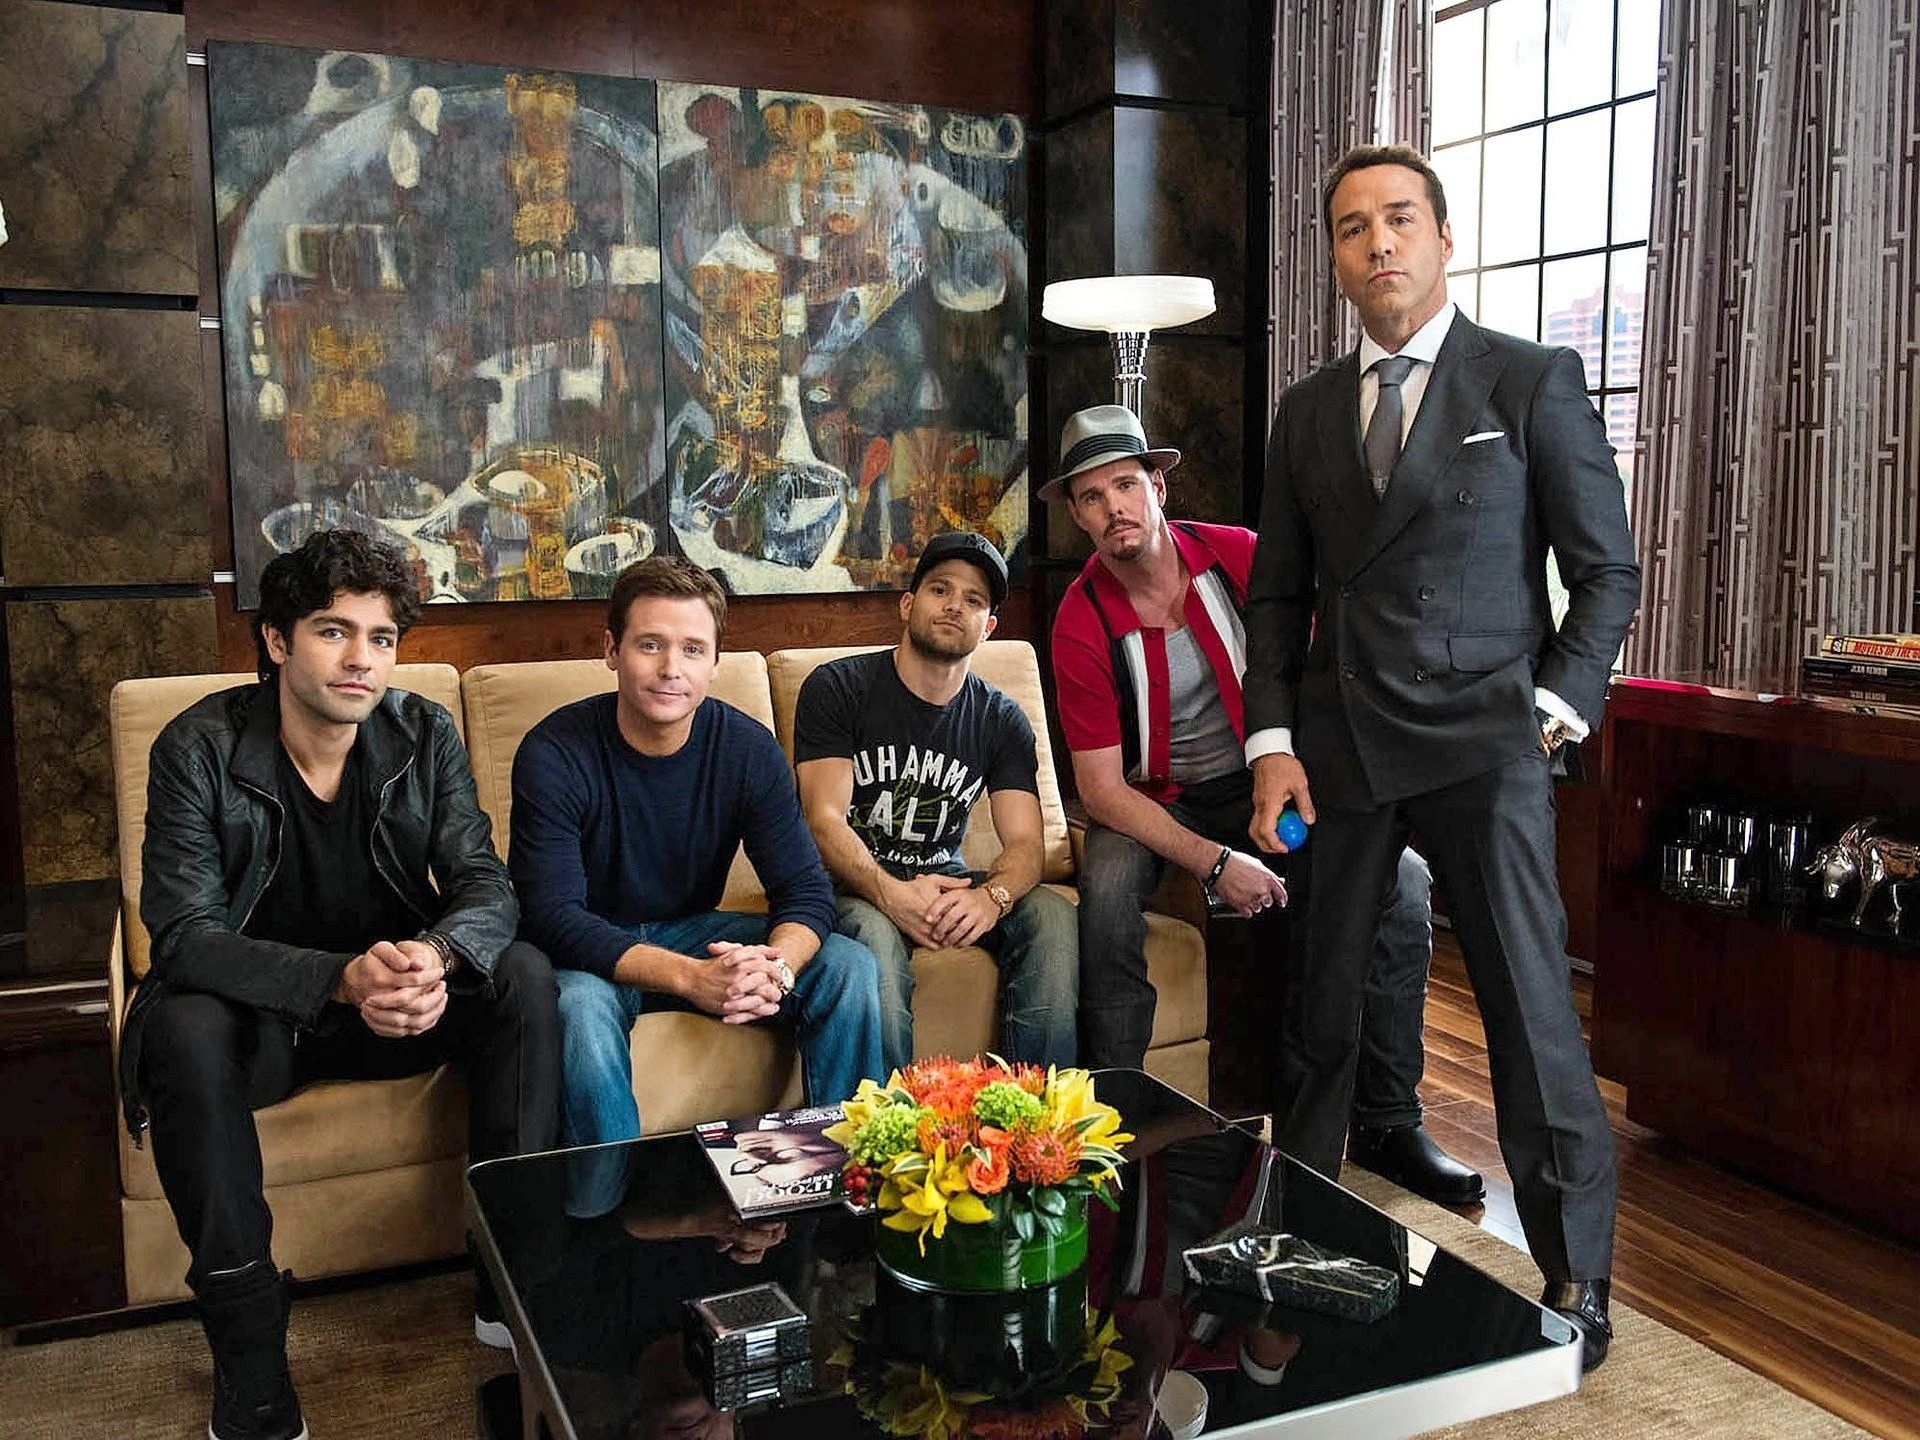 Kevin Connolly: Entourage, Eric Murphy, Ari Gold, Vincent Chase, Johnny “Drama” Chase, Salvatore “Turtle” Assante. 1920x1440 HD Wallpaper.